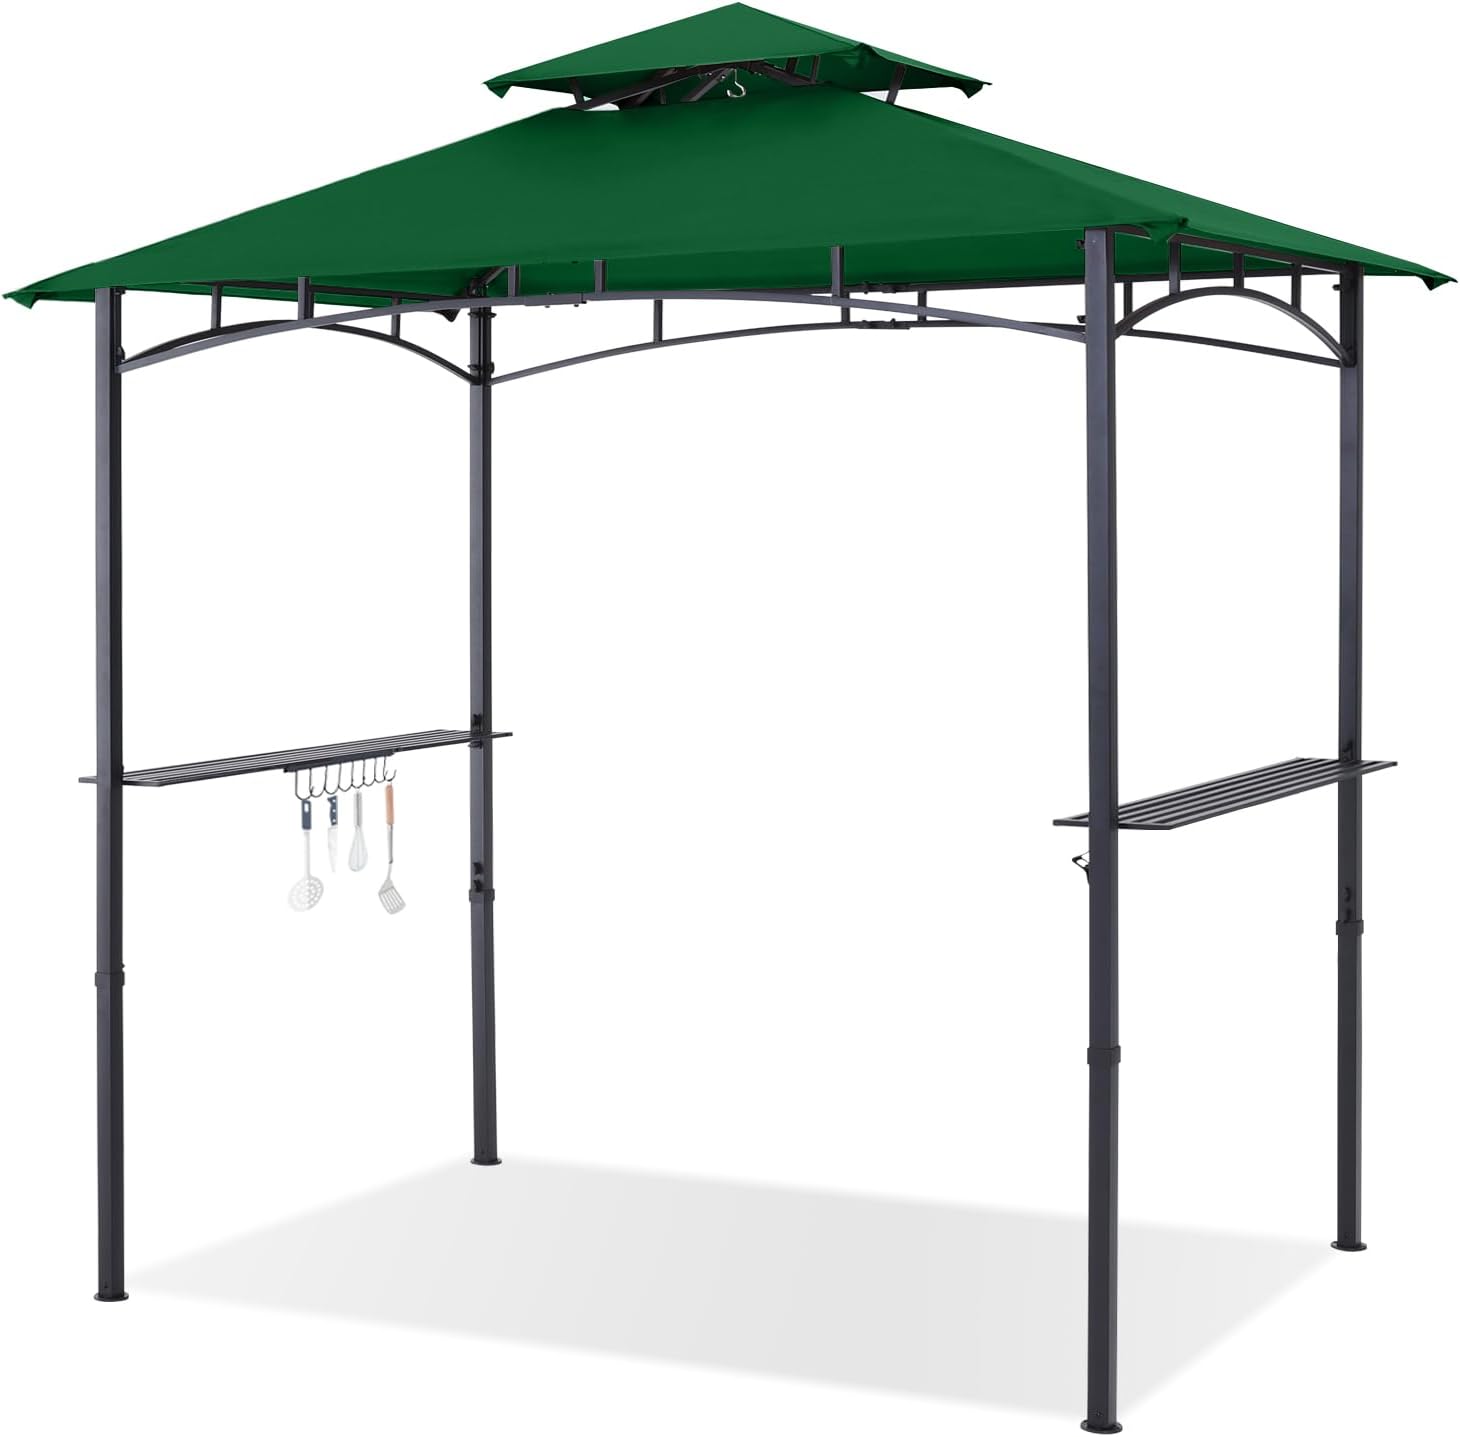 Outdoor 8x5 Grill Gazebo Shelter for BBQ with LED Light